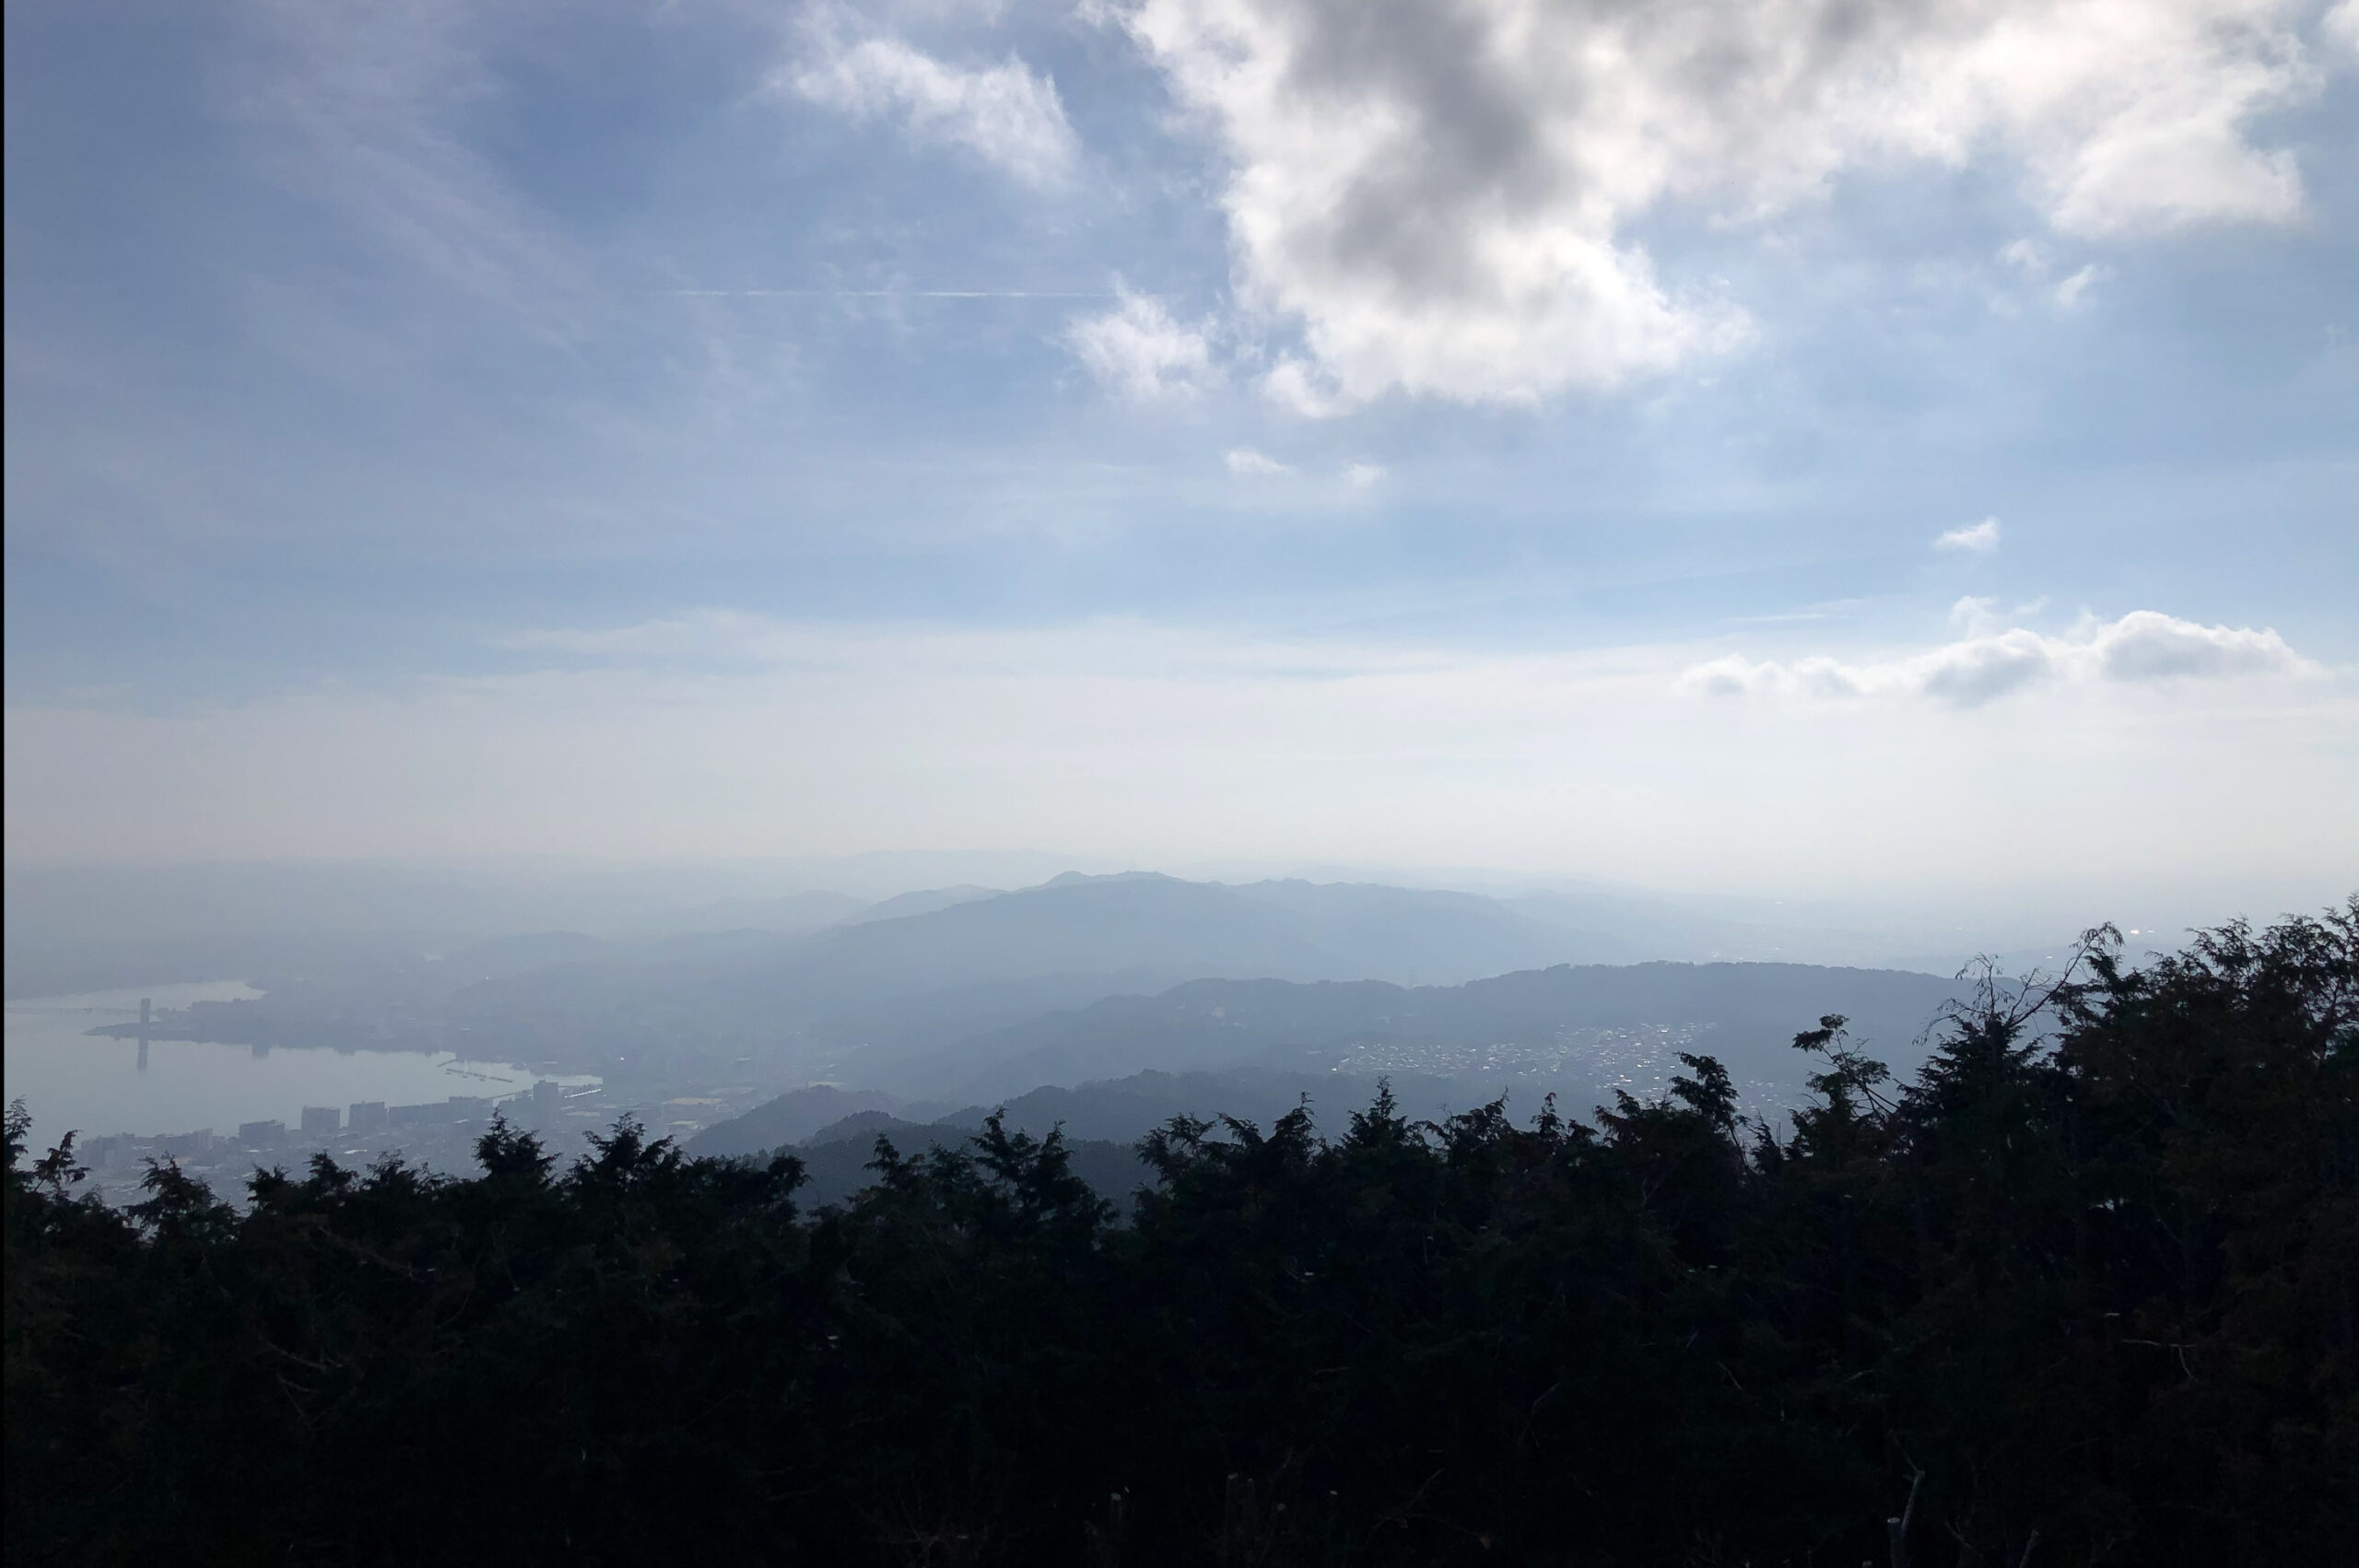 The views from Mt Hiei on a clear day are spectacular.